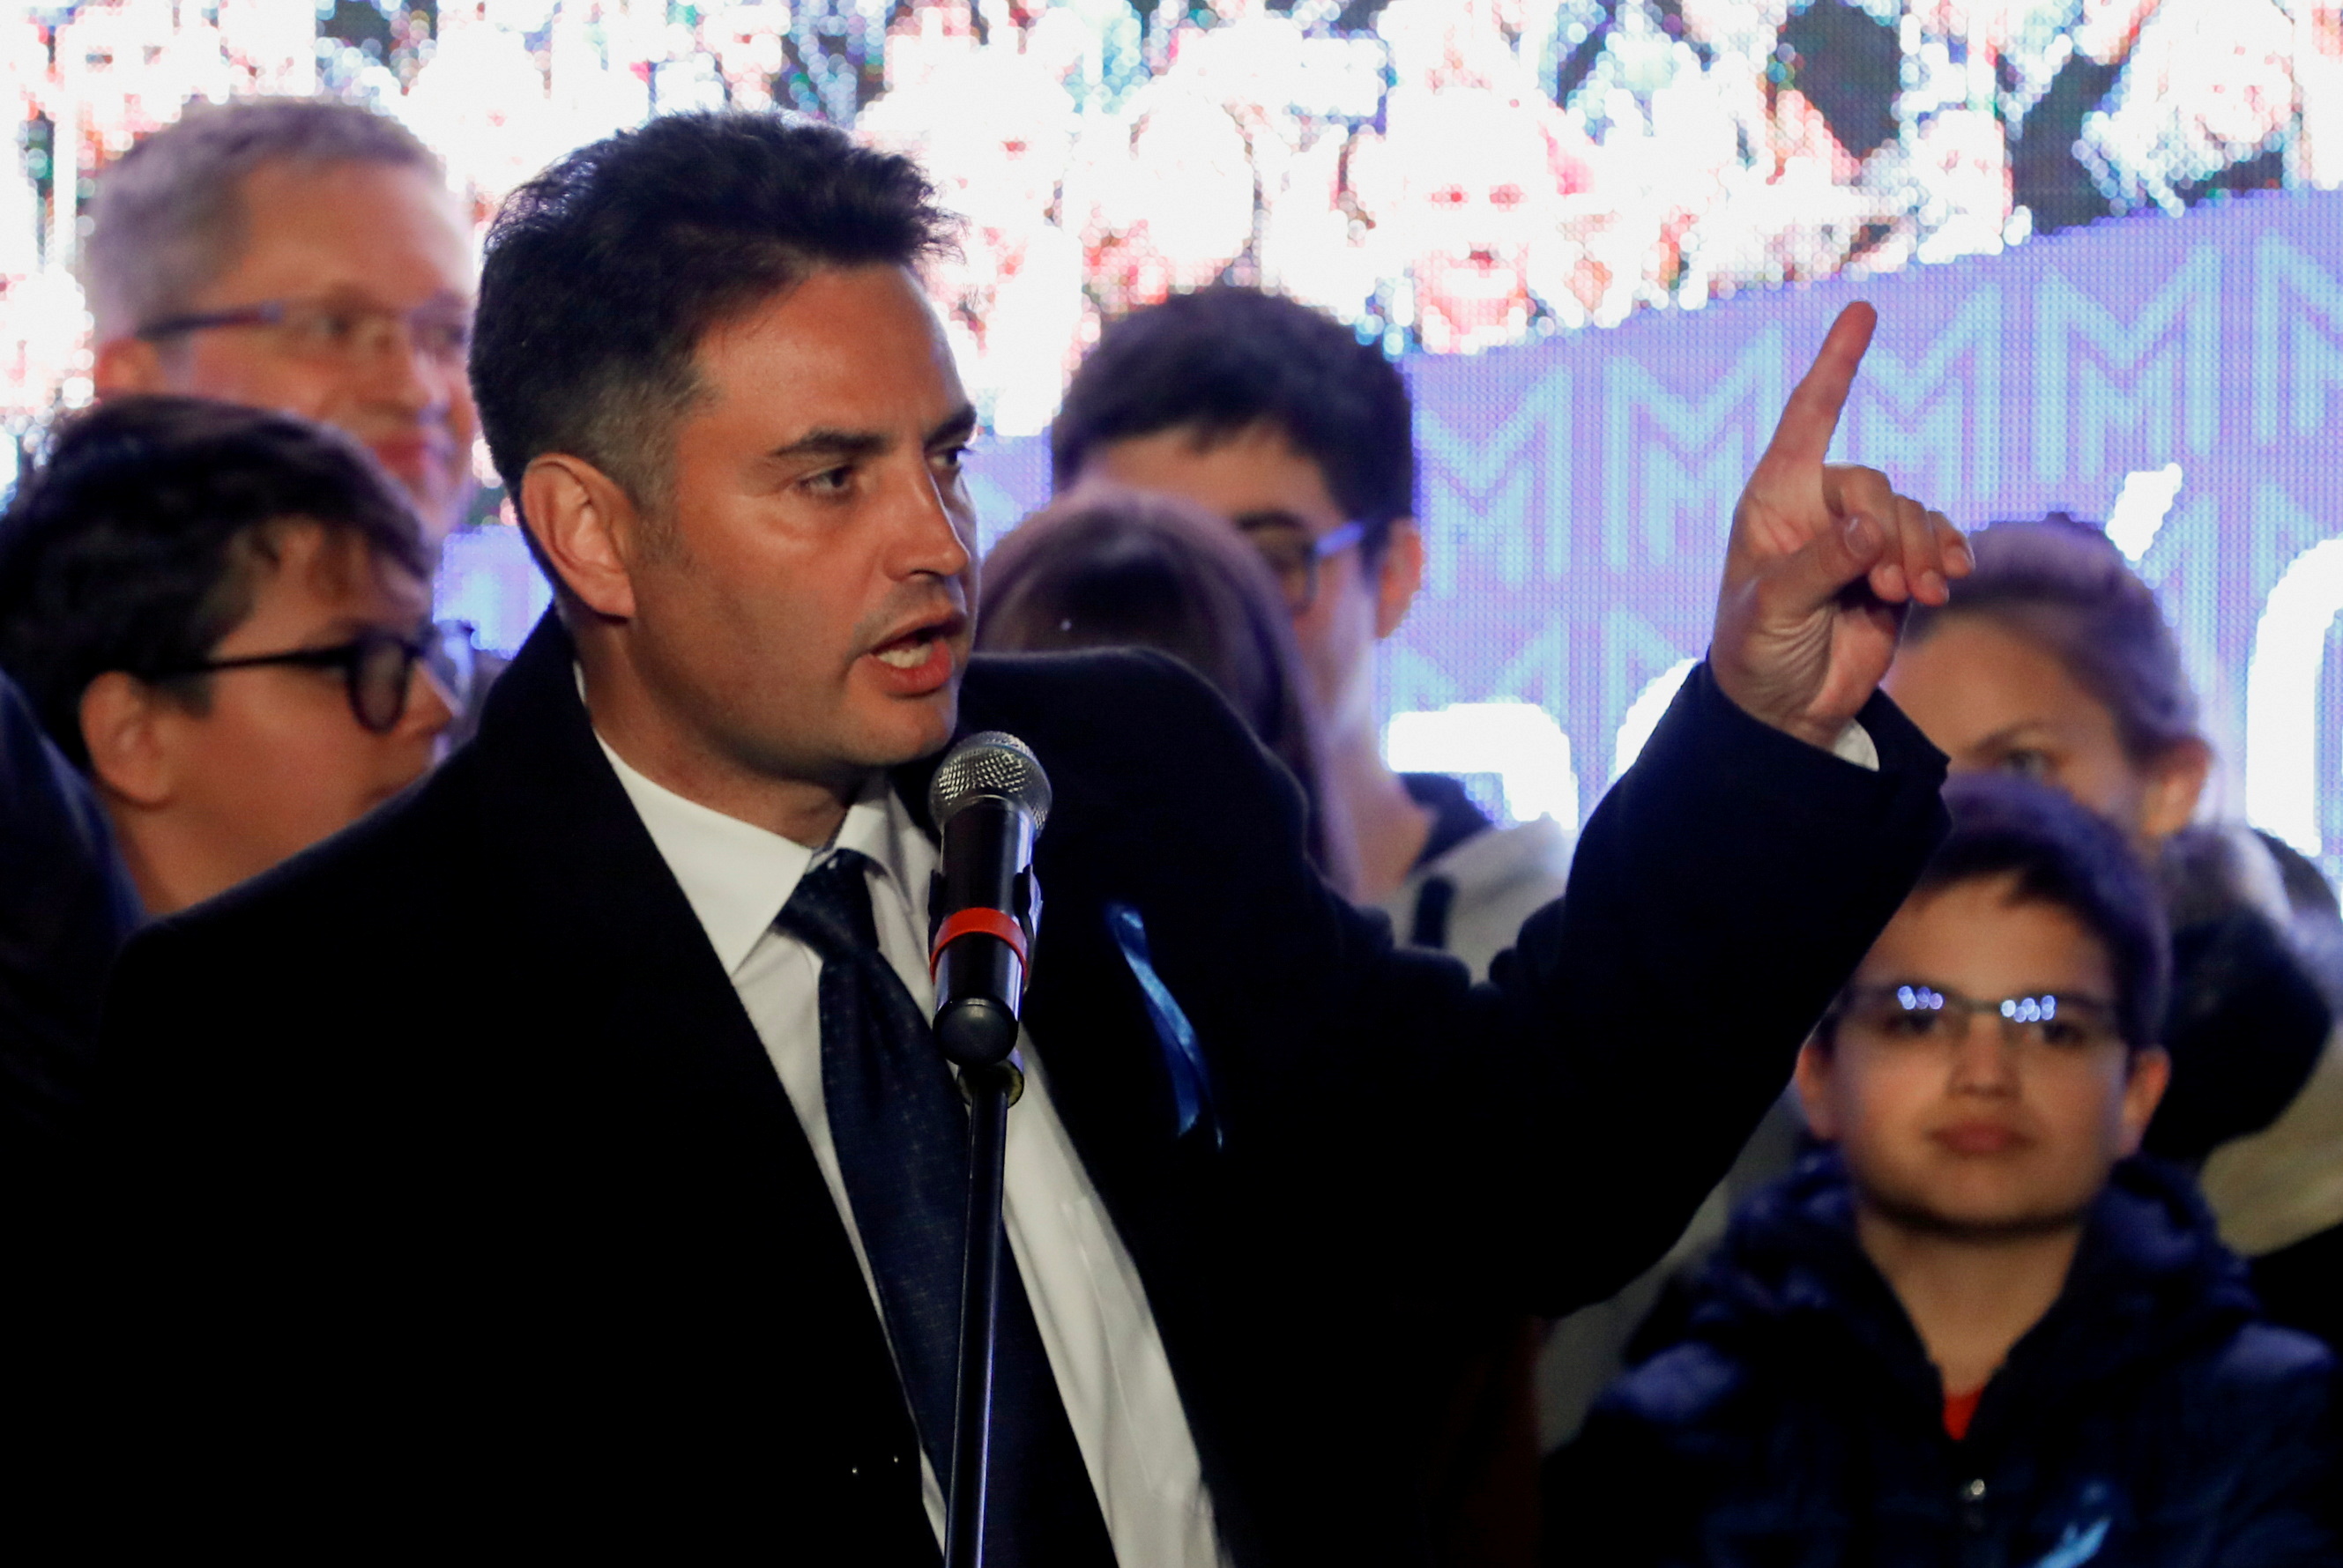 Opposition candidate for prime minister Peter Marki-Zay gestures as he speaks at the election headquarters in Budapest